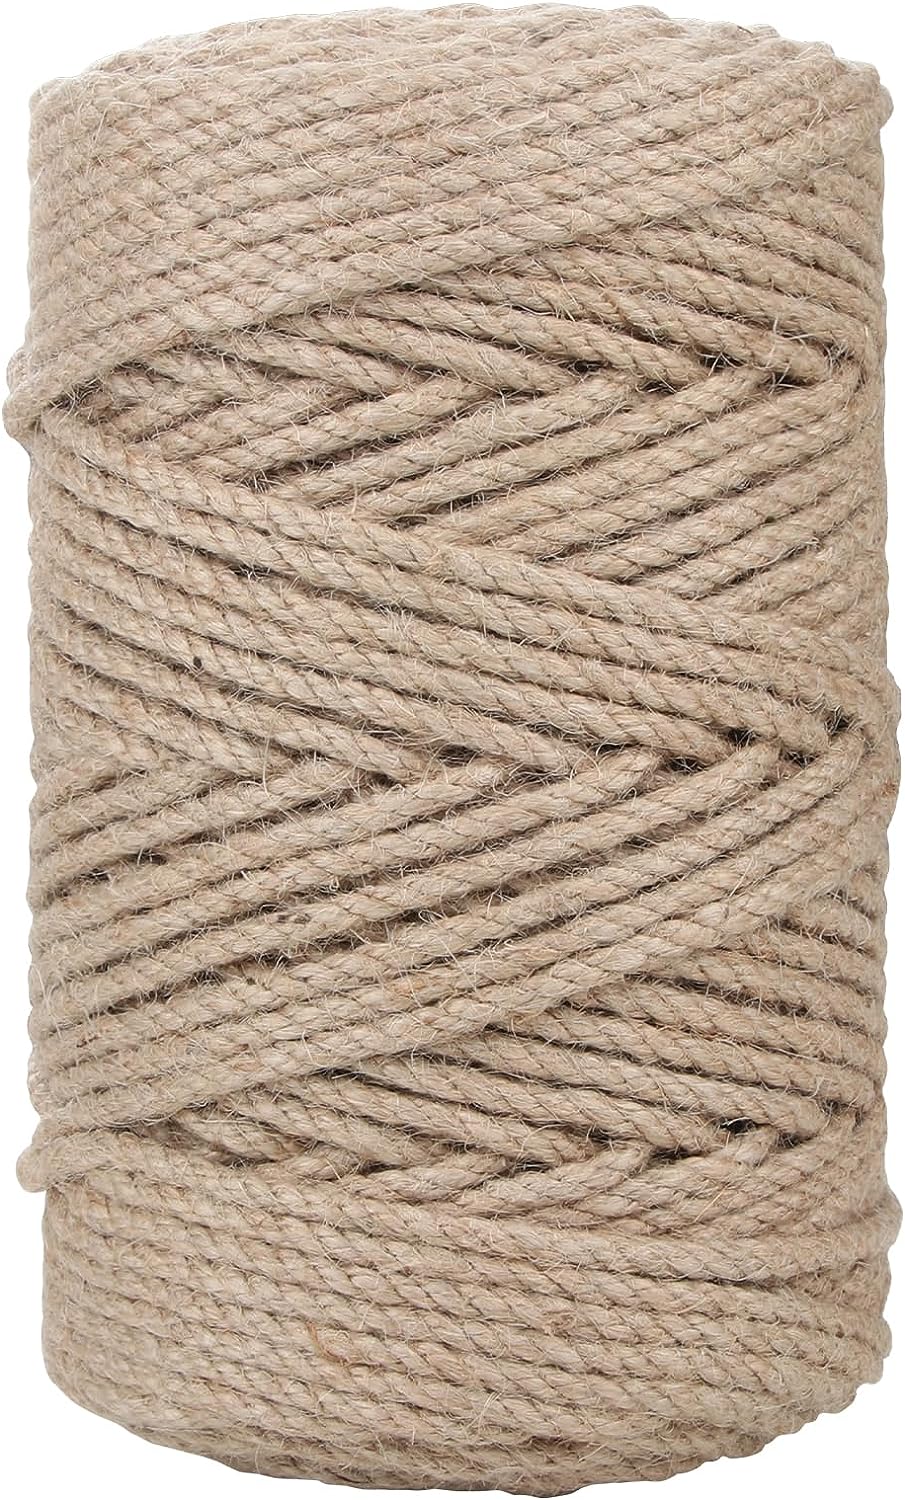 Anwyll Metallic Gold Twine String, Christmas Gold Silver Twine String  Bakers Twine, 656 Feet 1.5mm Metallic Gold Glitter String for Crafts, Gold